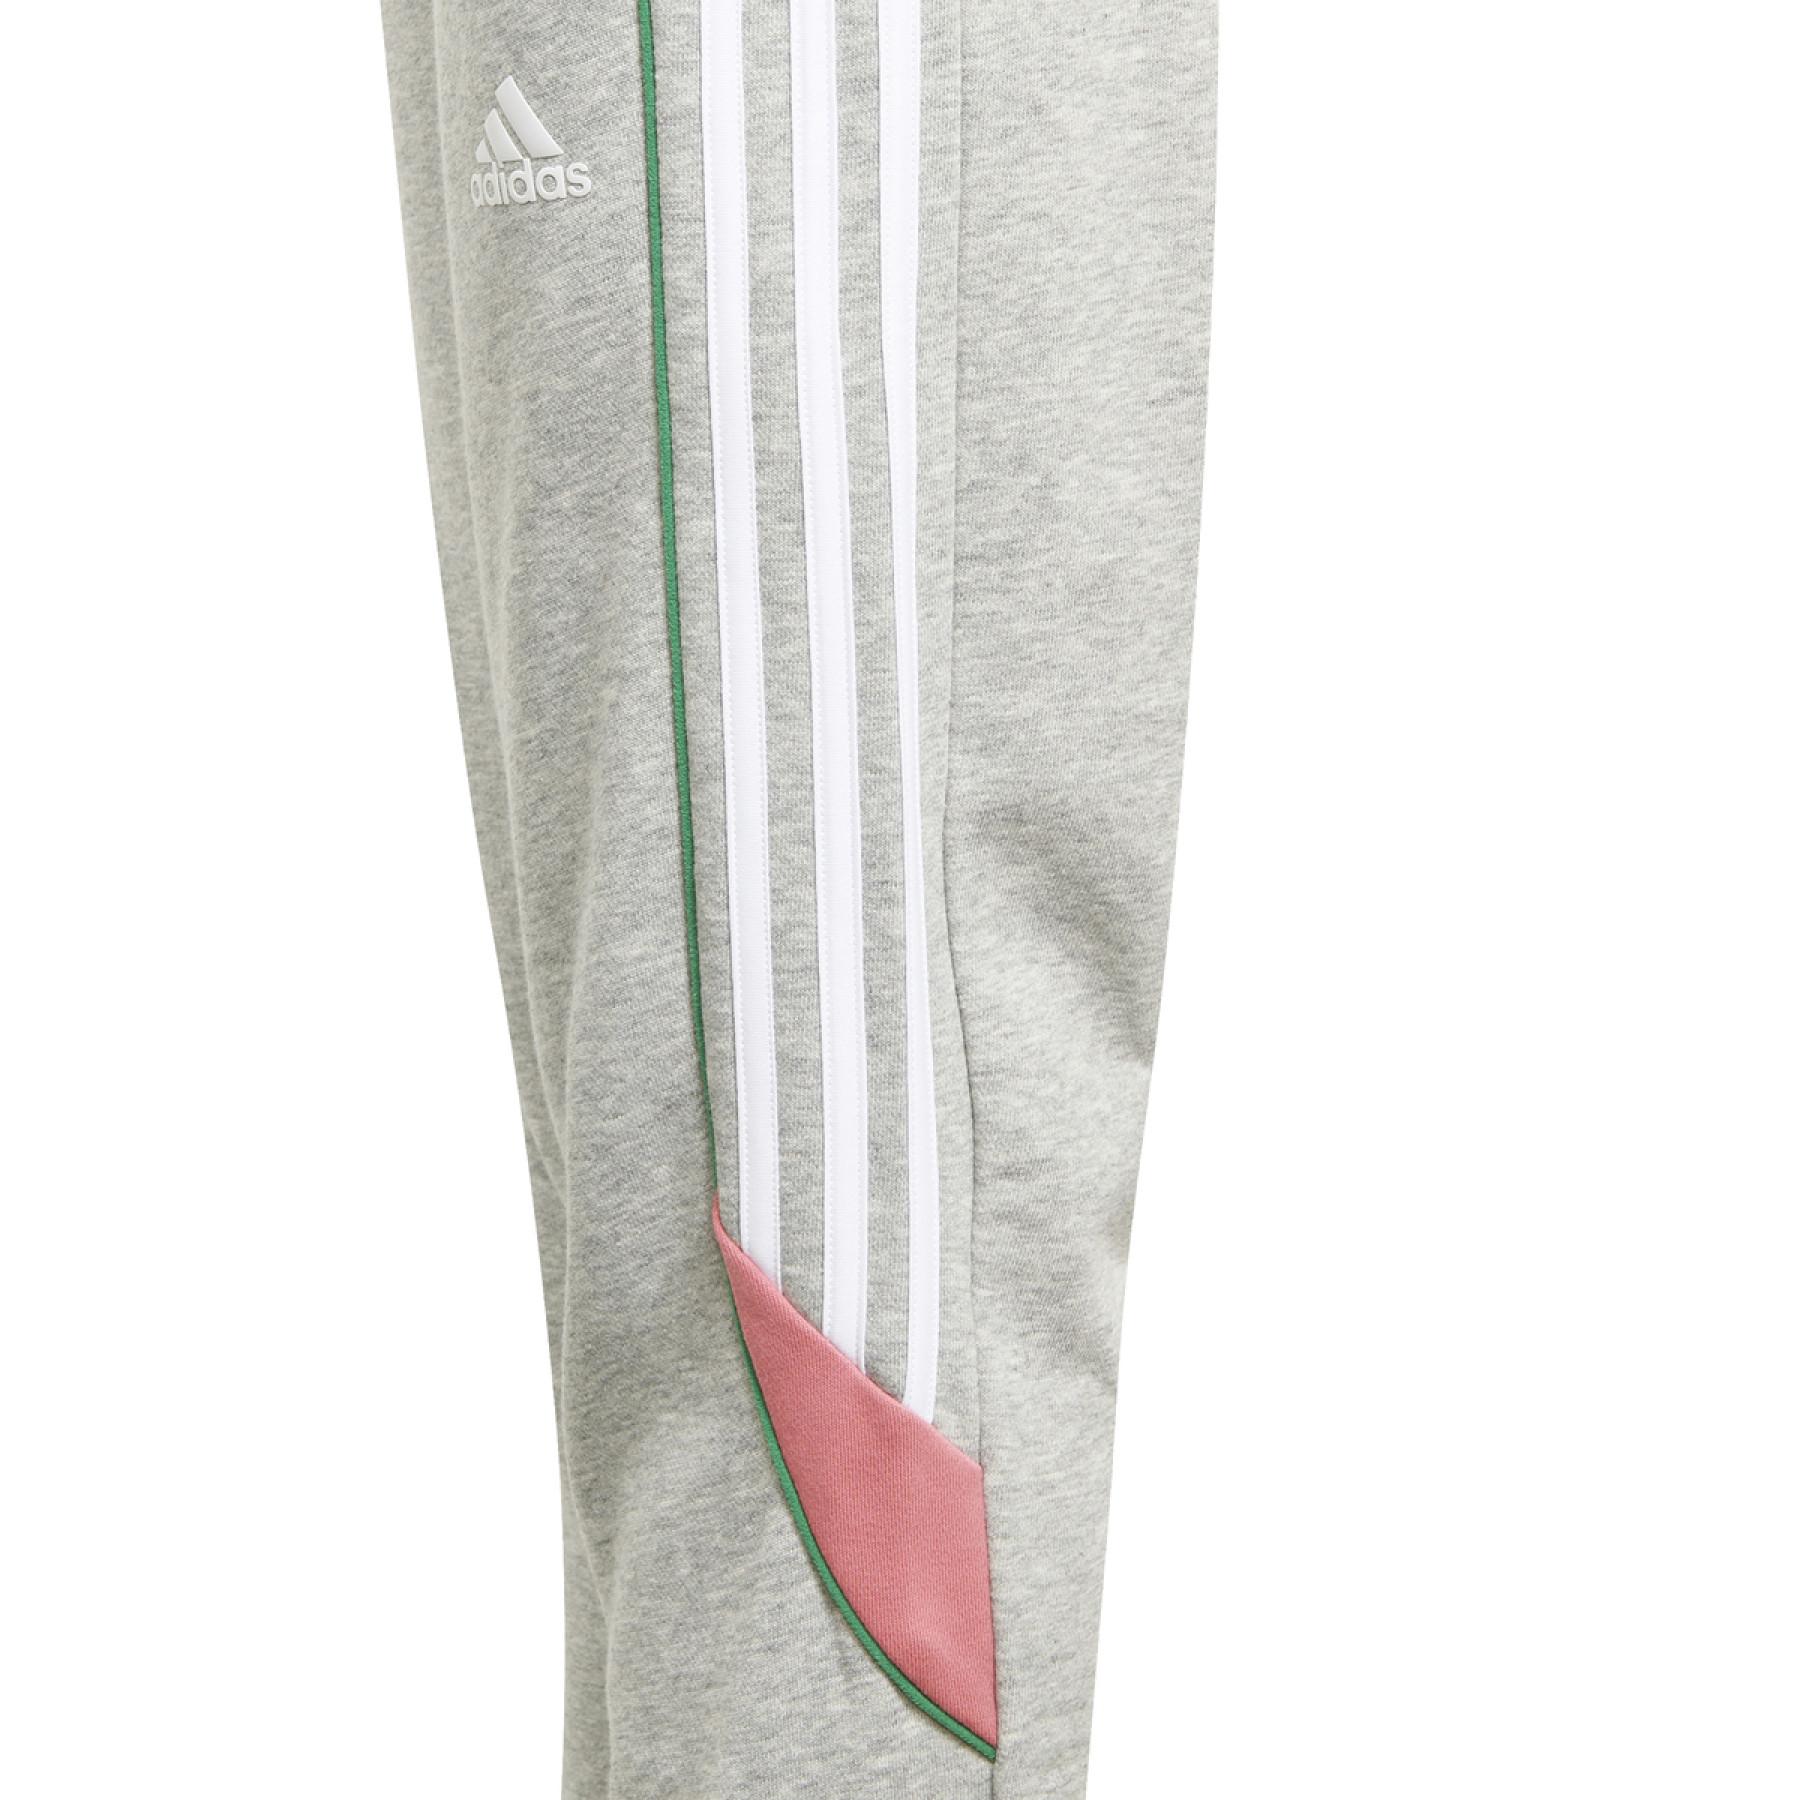 Children's trousers adidas Bold